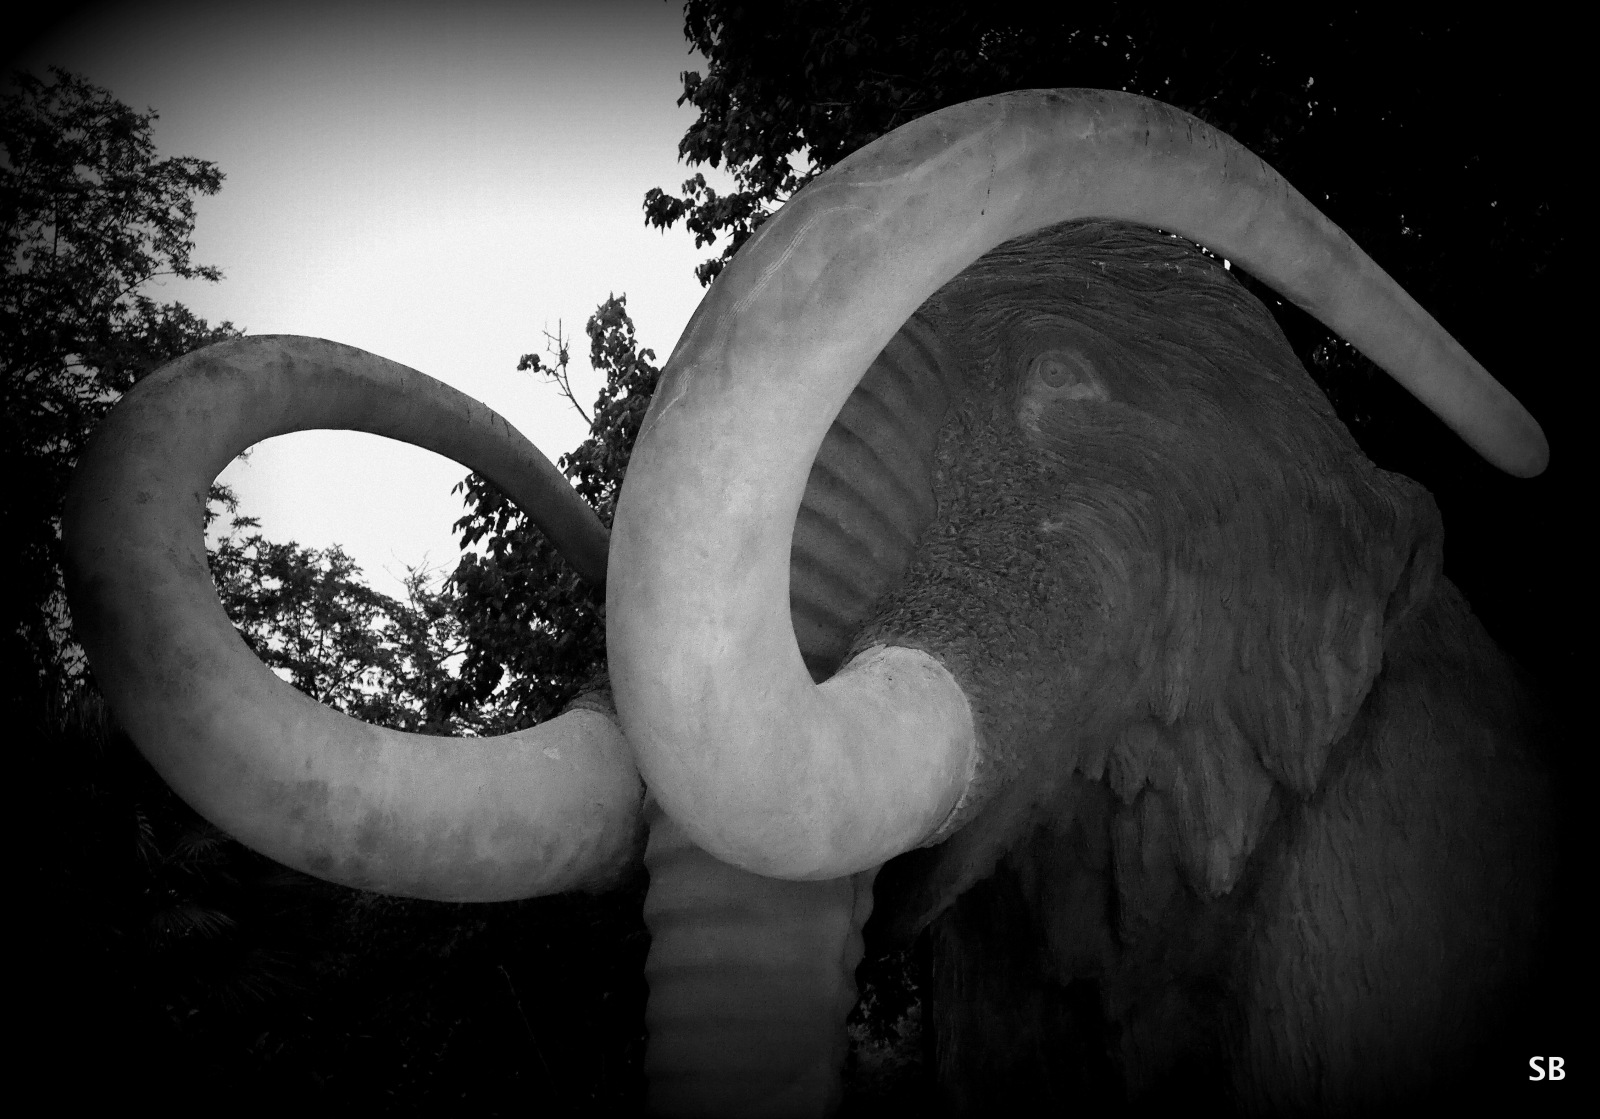 Tusks that Stand the Test of Time